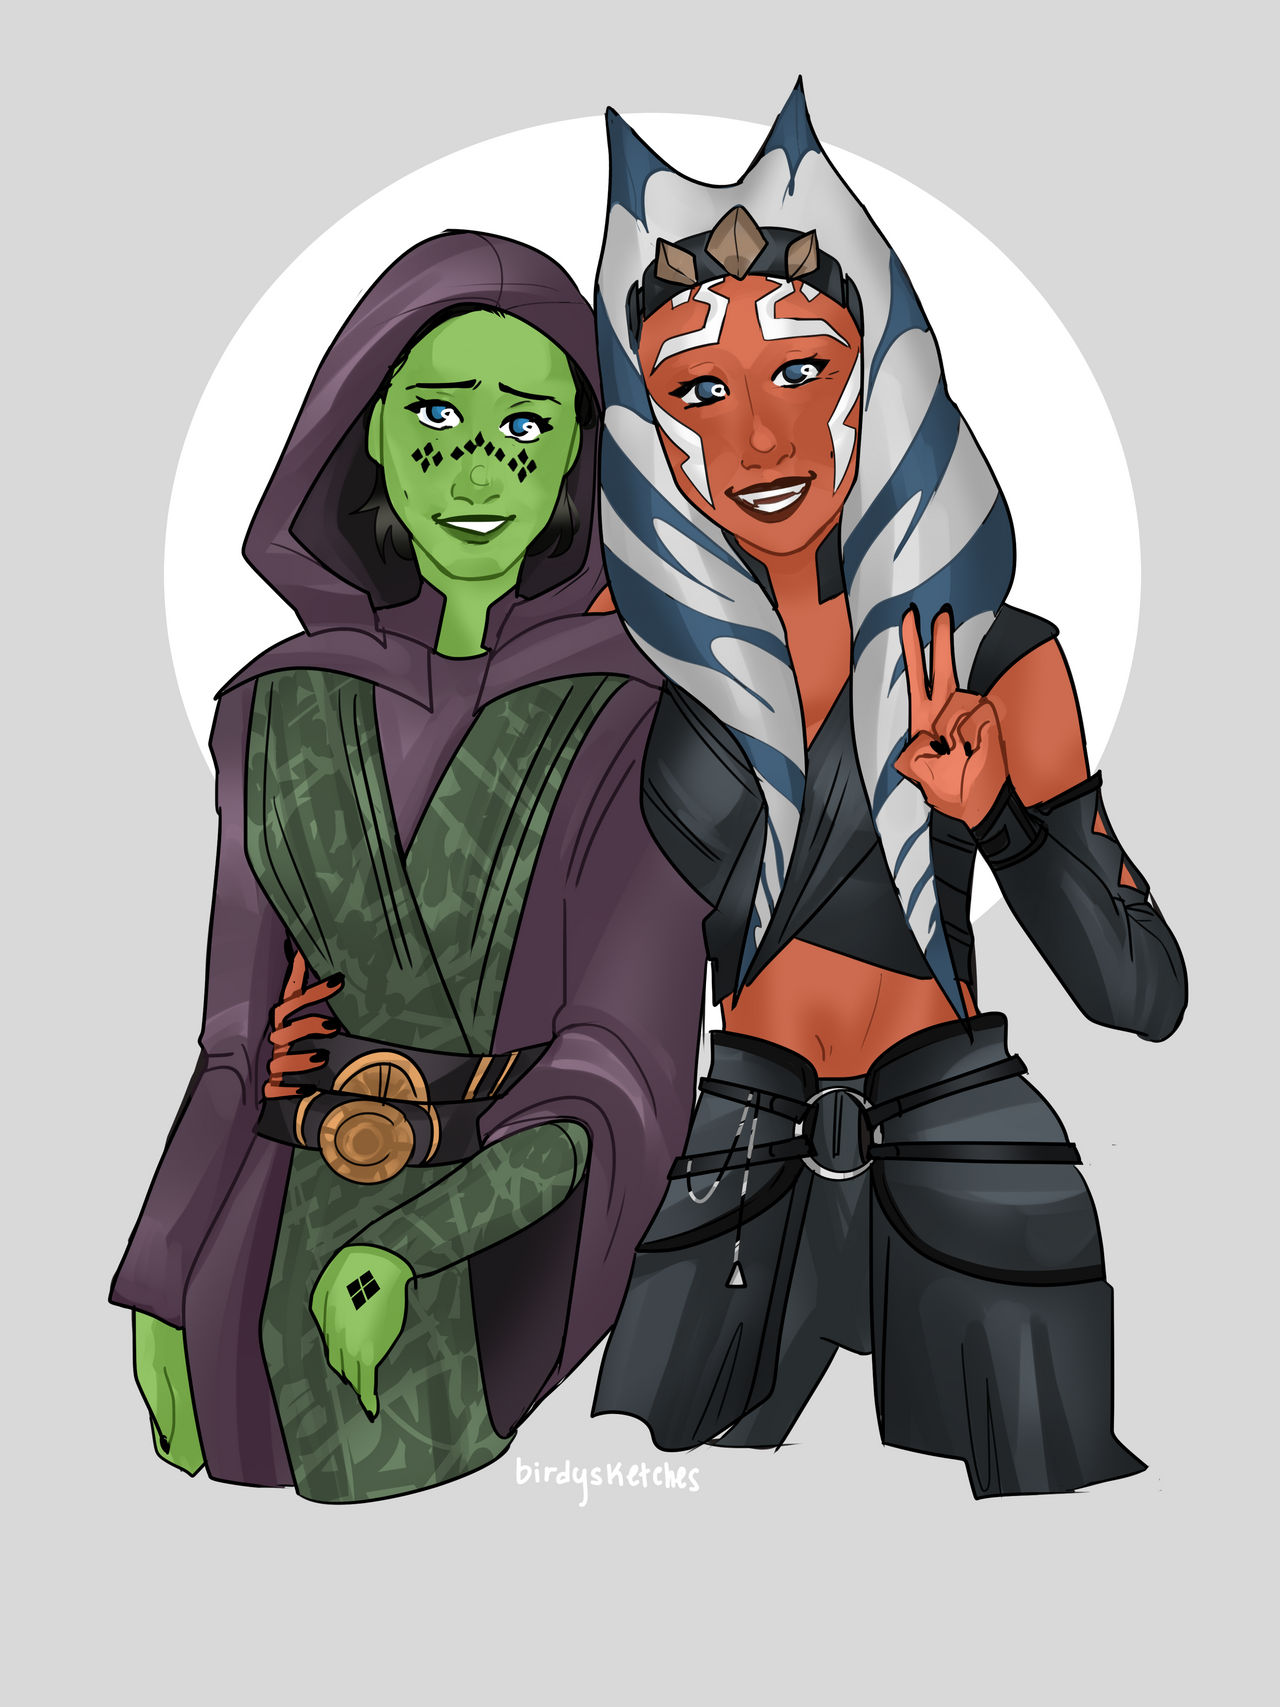 Barriss Offee And Ahsoka Tano As Jedi Knights By Imaxwebber On Deviantart